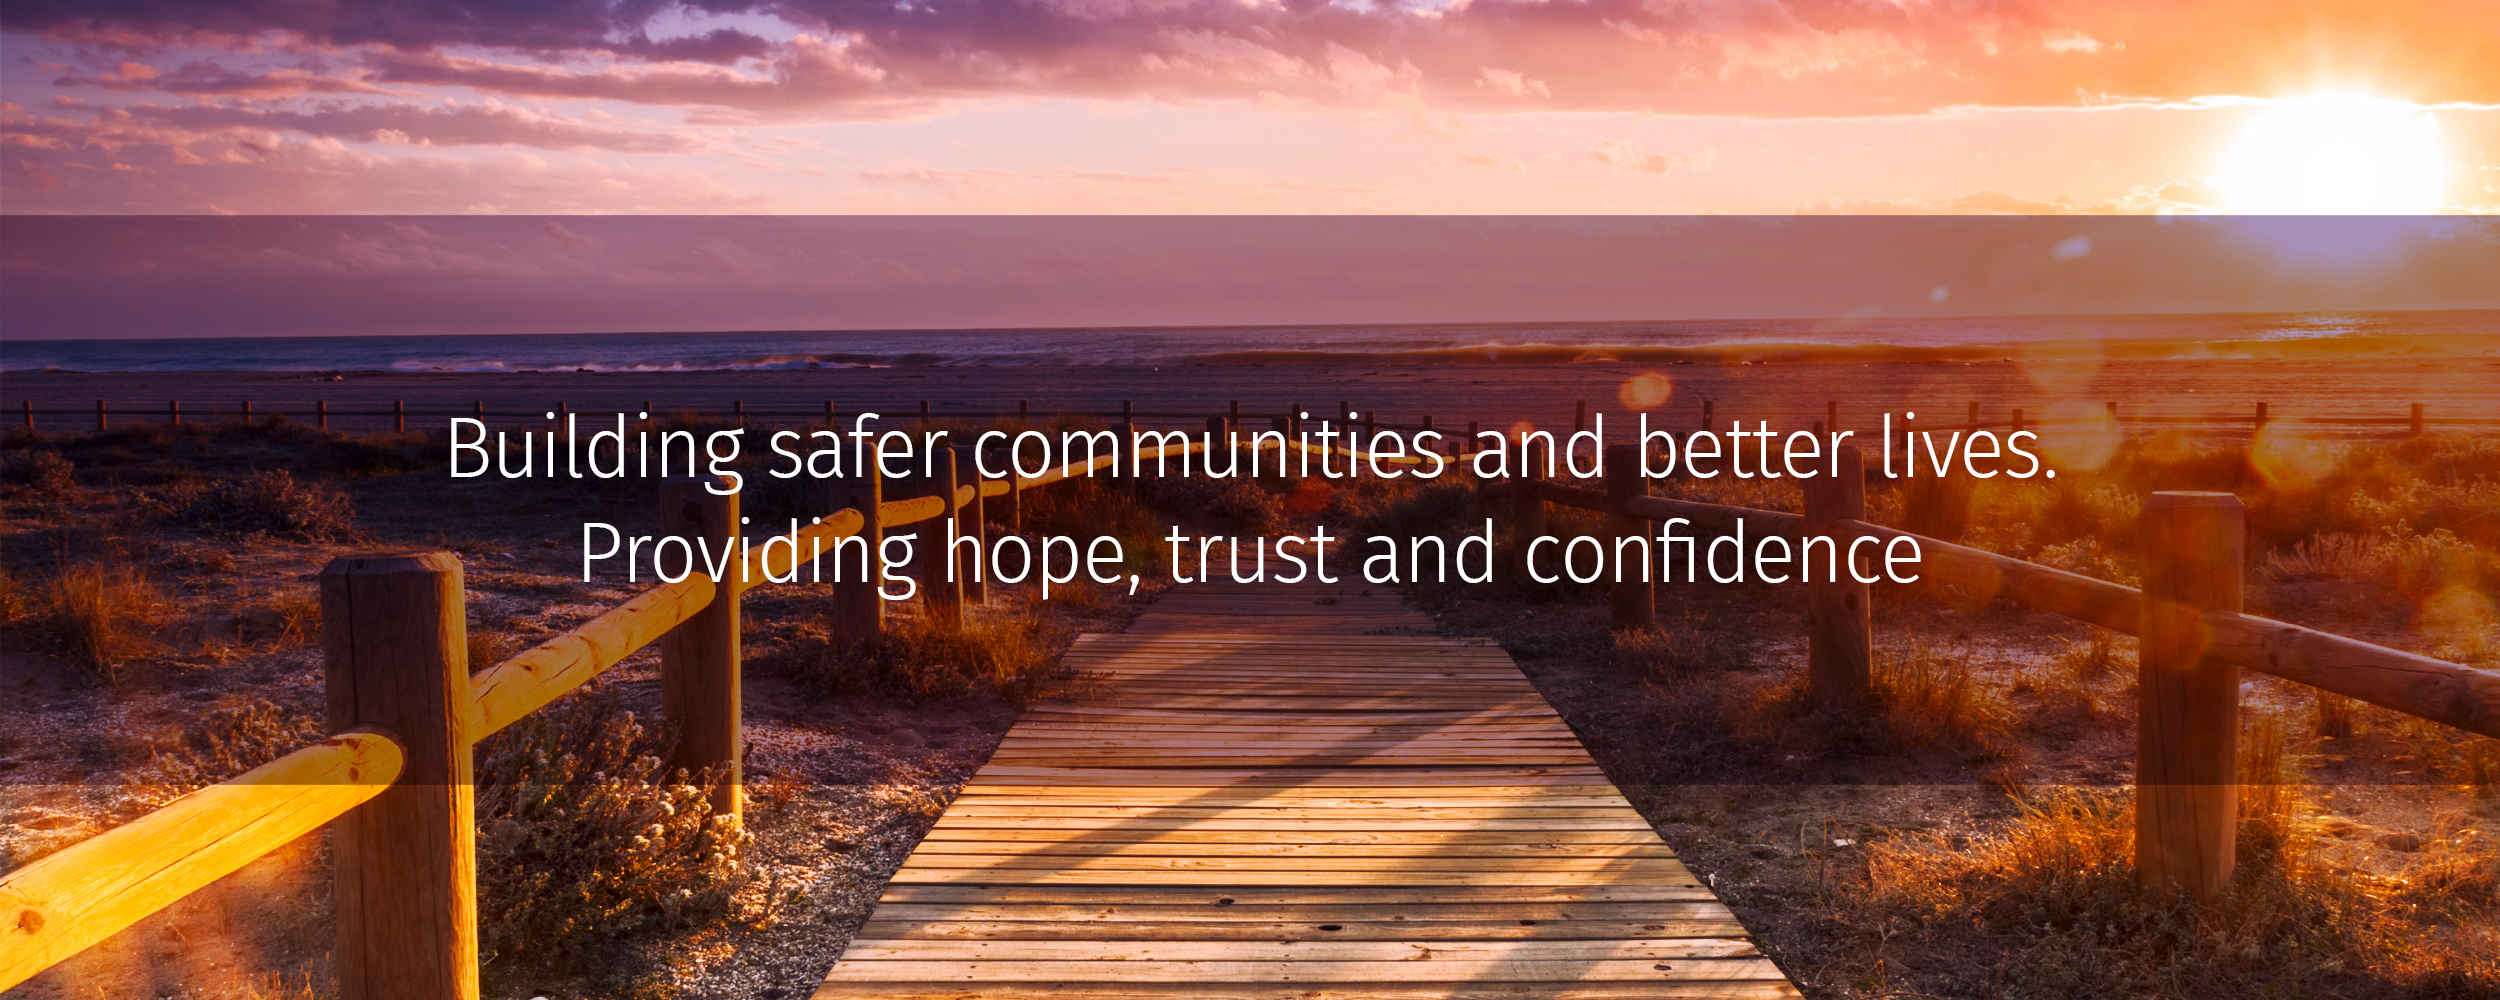 Building safer communities and better lives. Hope, trust... confidence